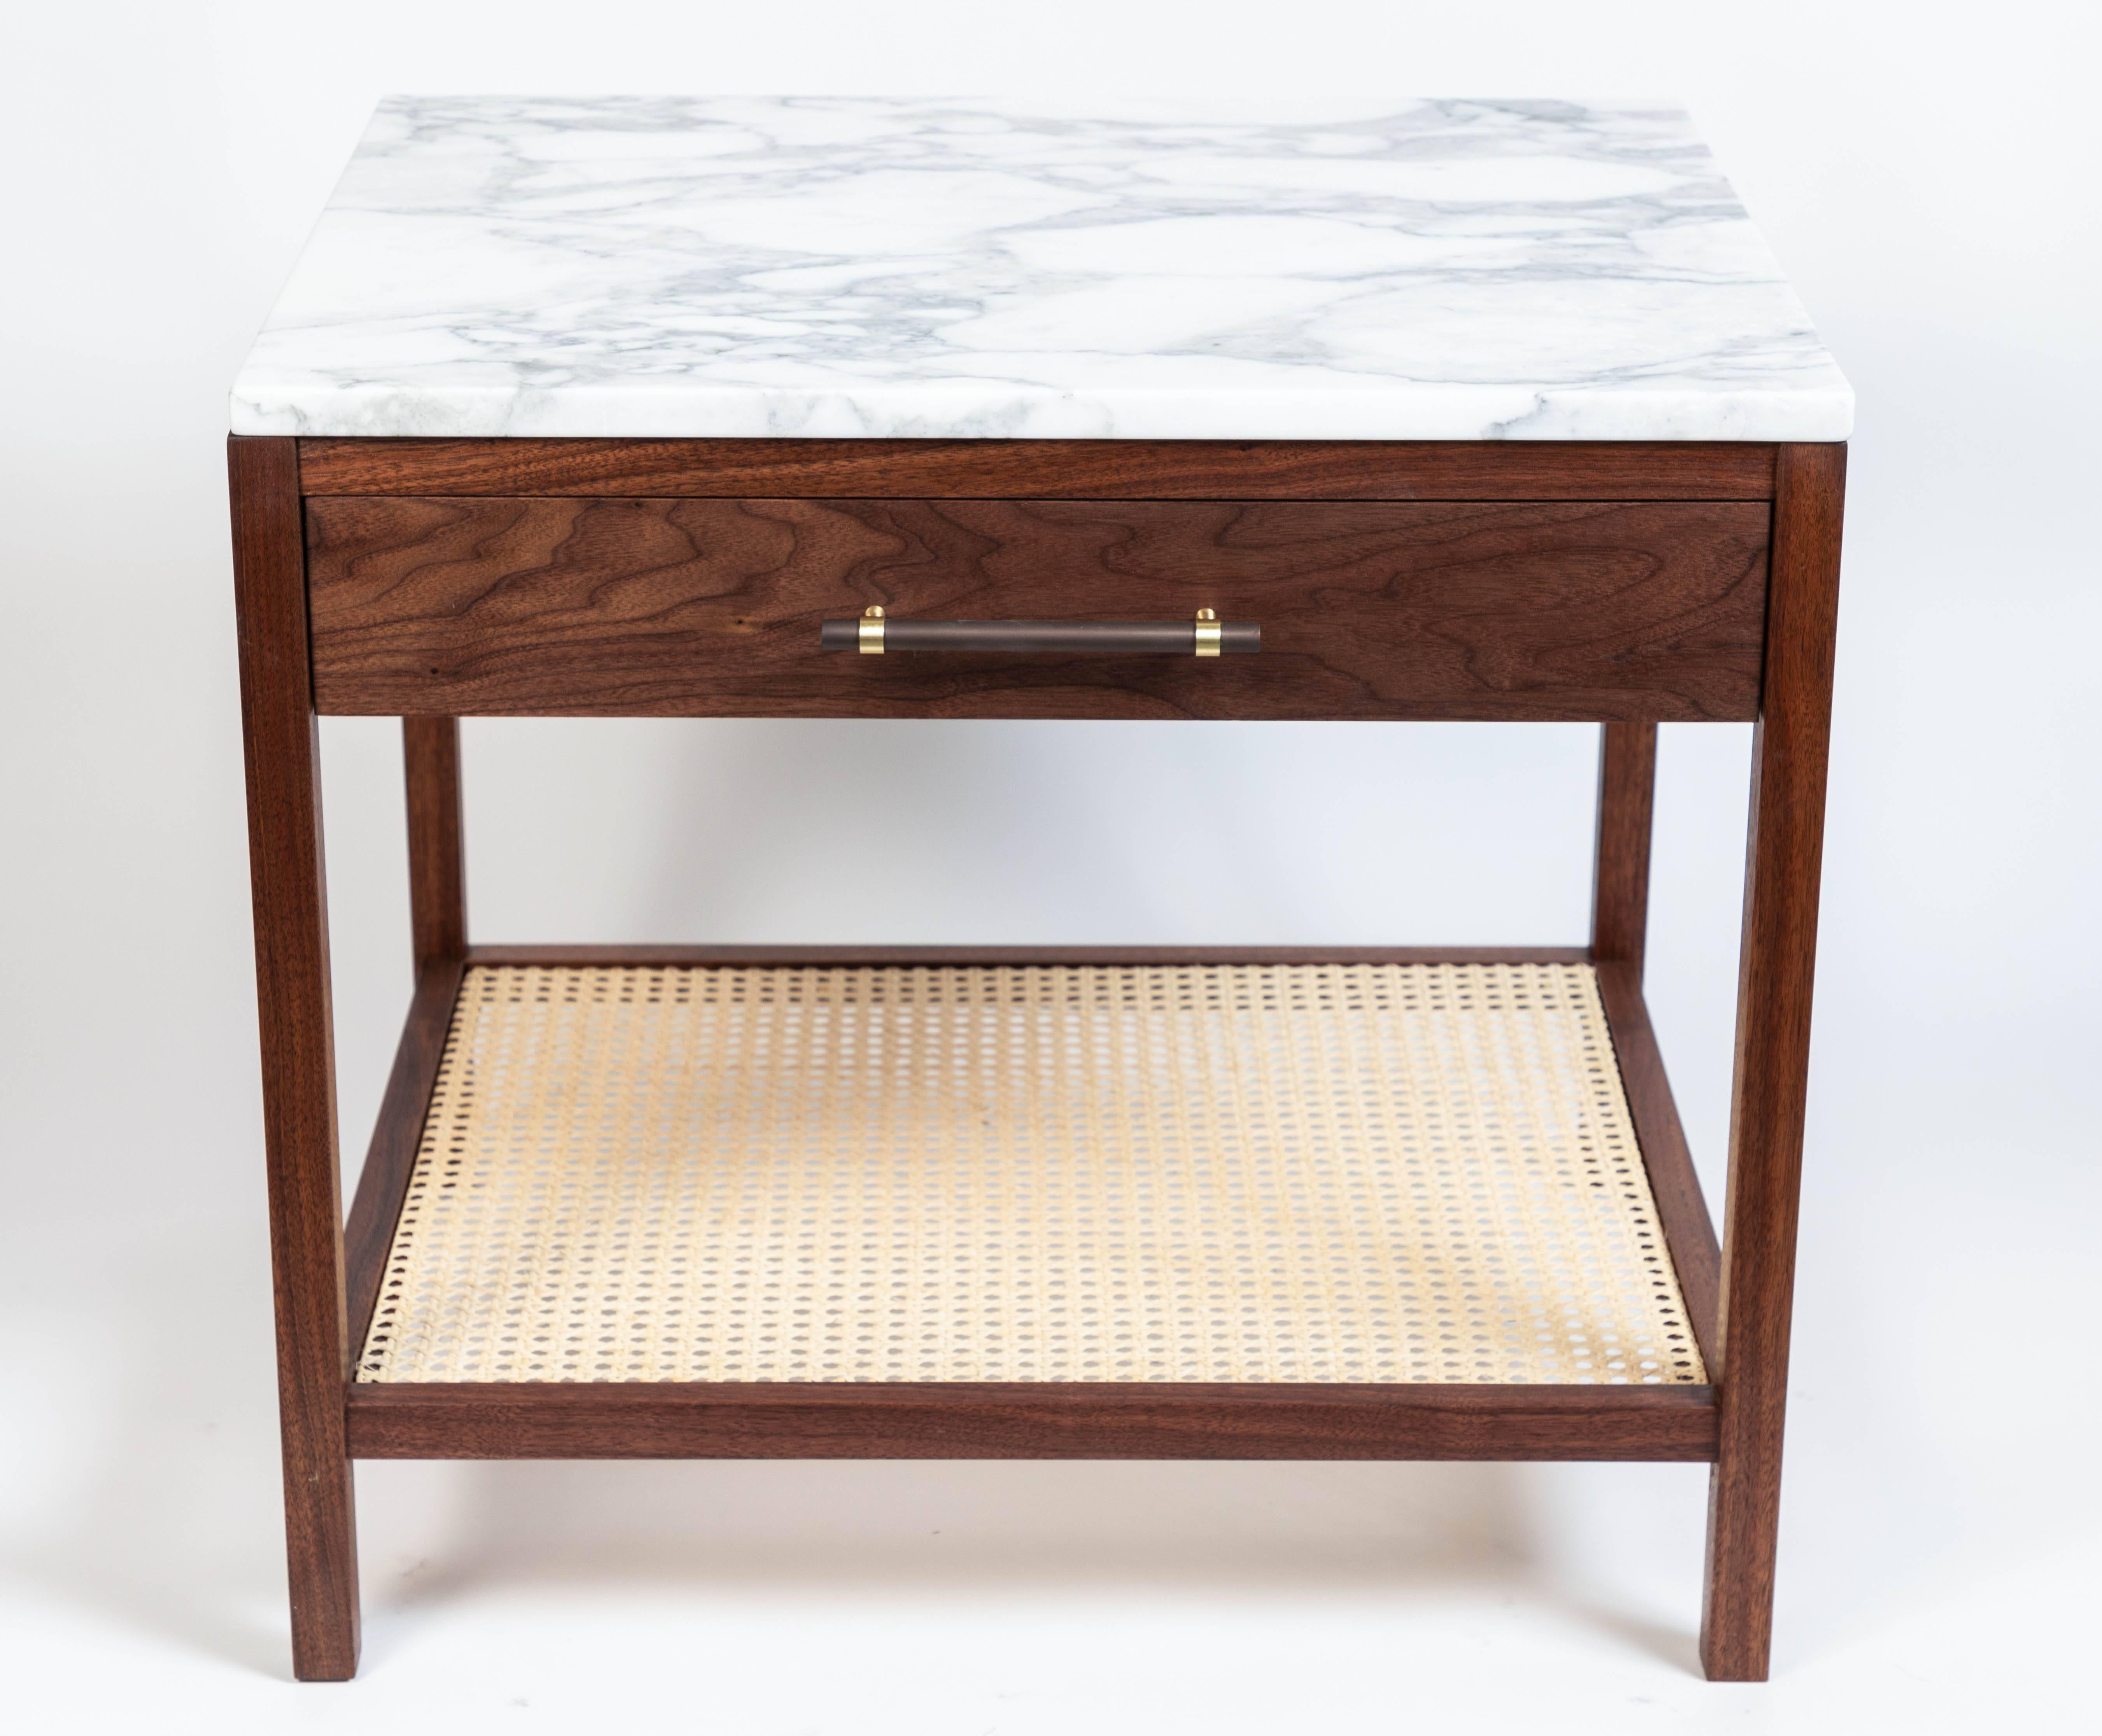 Custom-made end / side table from solid walnut with single drawer (interior drawer is maple), caned bottom shelf and white and grey marble top. 

Drawer hardware is oil rubbed bronze and brass. 

Dimensions may be slightly adjusted.

Production time